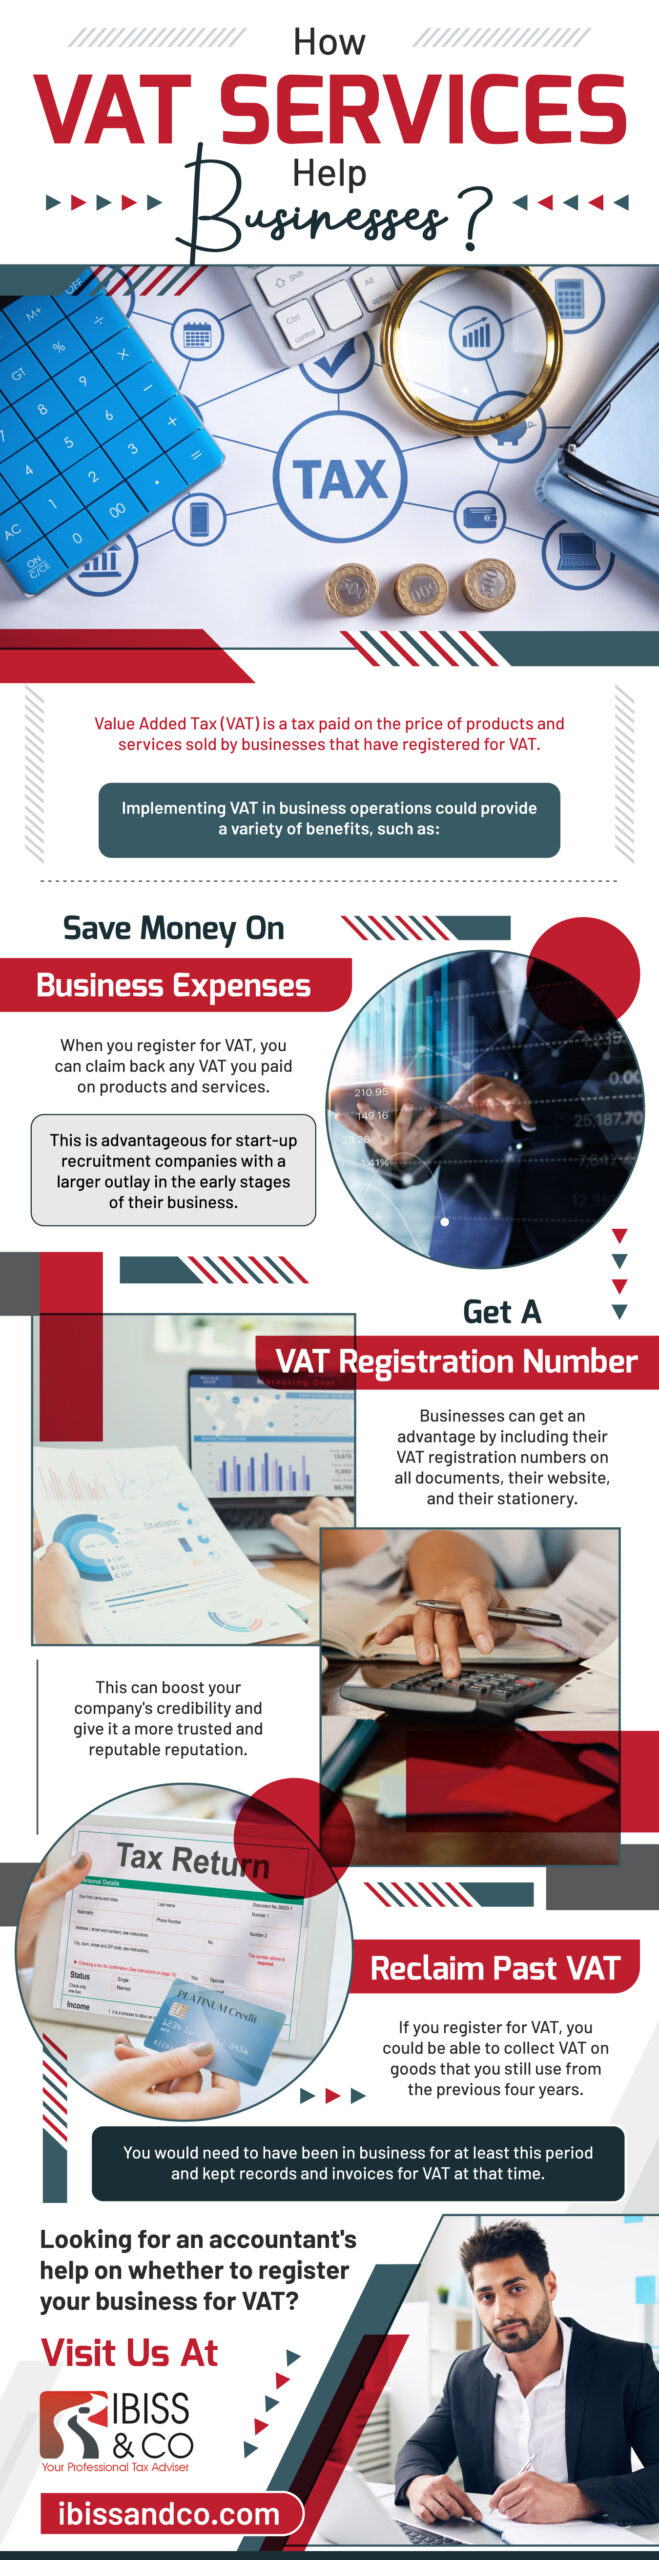 How VAT Services Help Businesses?-INFOGRAPHIC